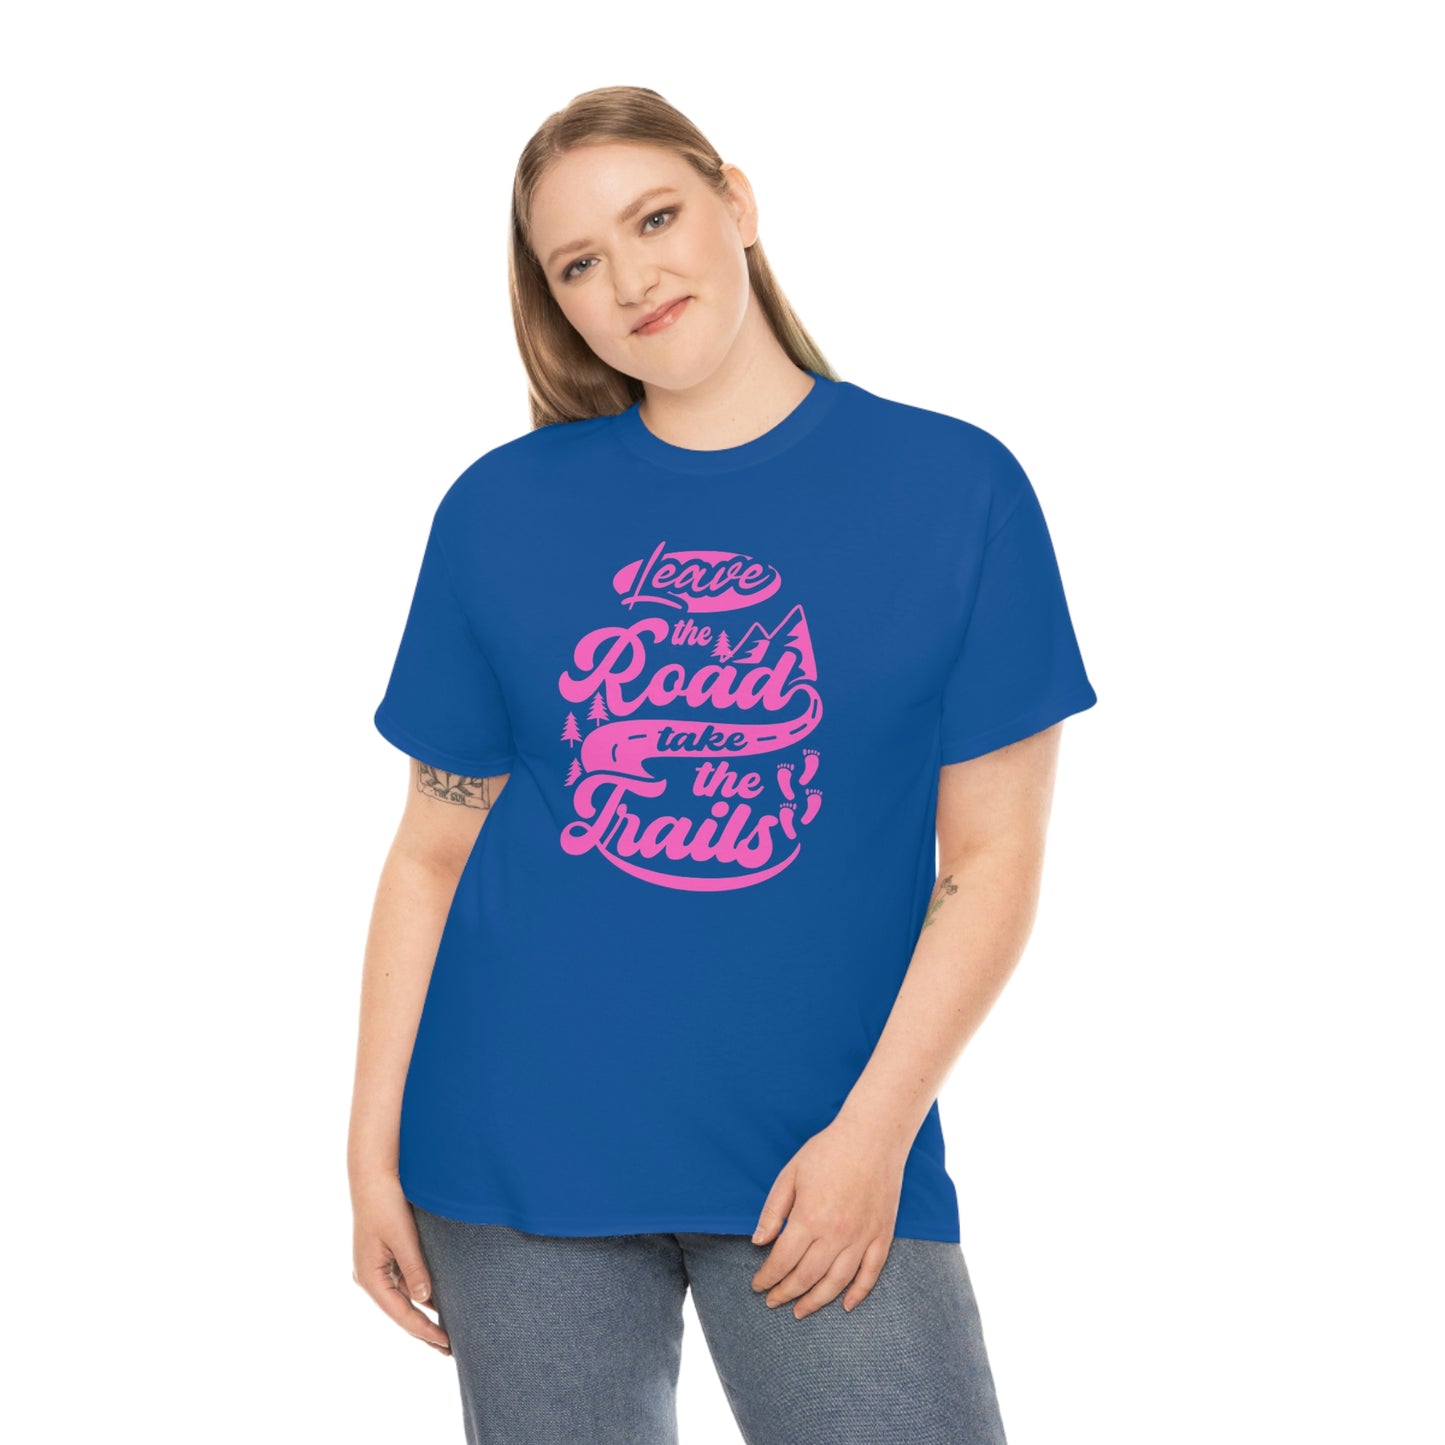 ‘Leave the road, take the trails’  Unisex Heavy Cotton Tee